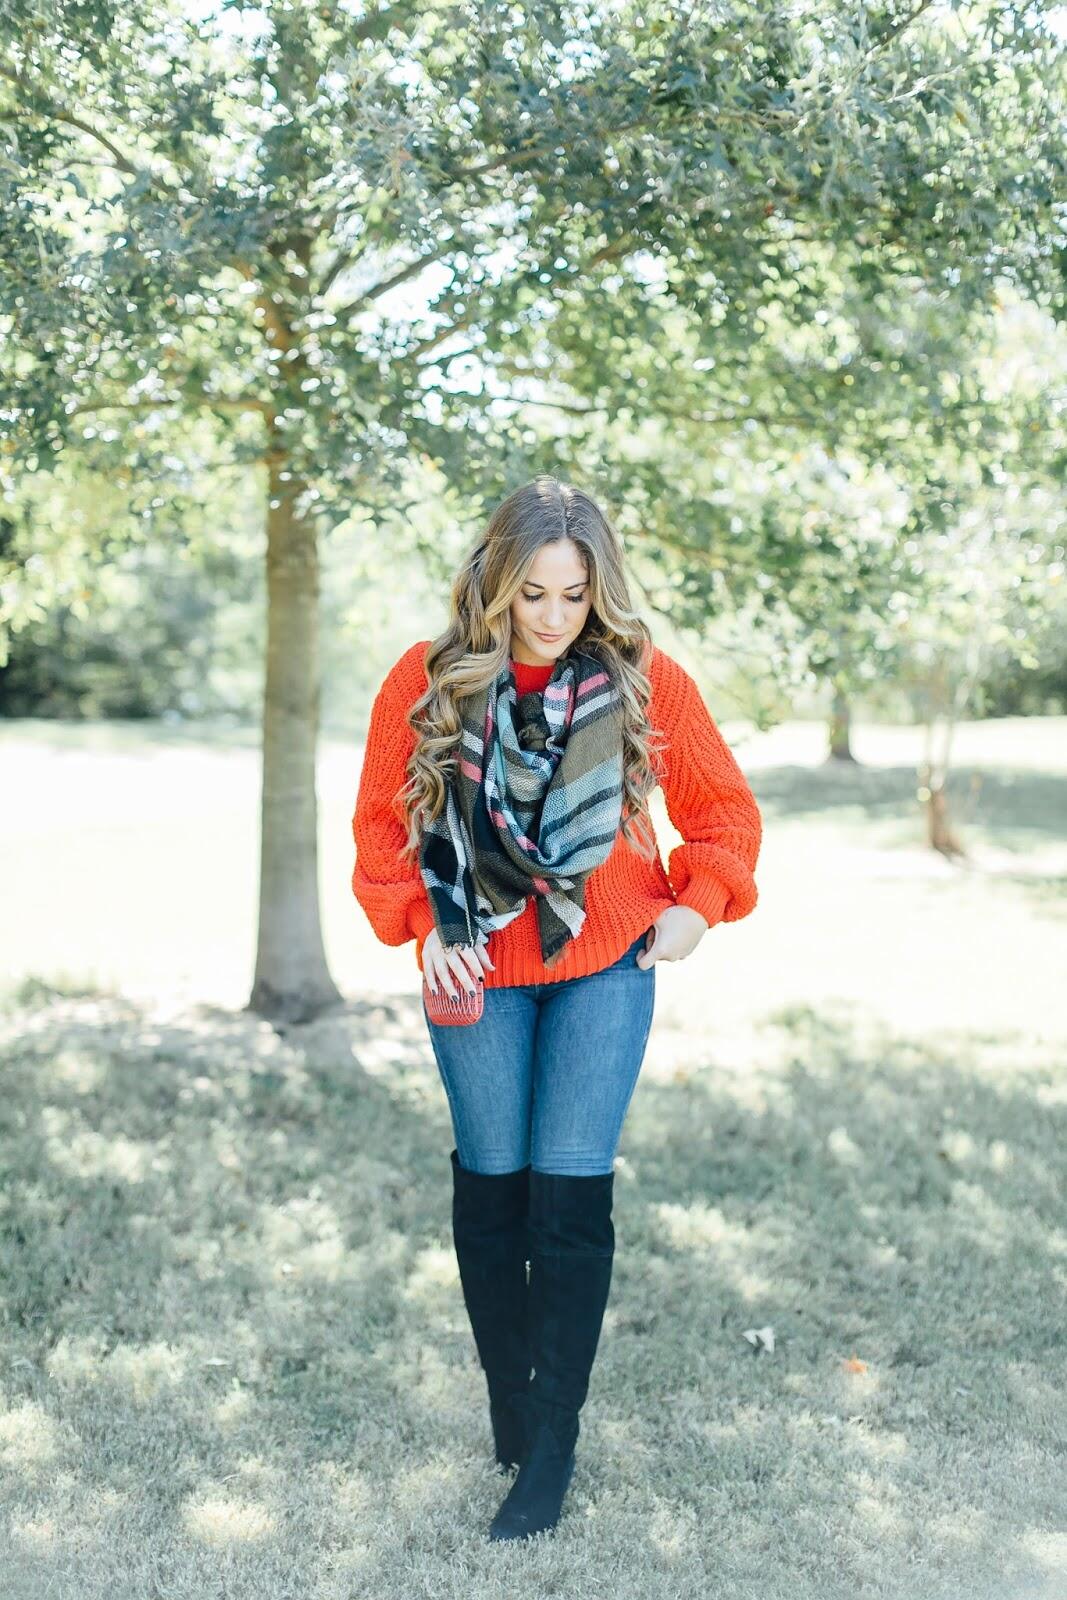 Trend Spin Linkup - Sweater Weather by East Memphis fashion blogger Walking in Memphis in High Heels